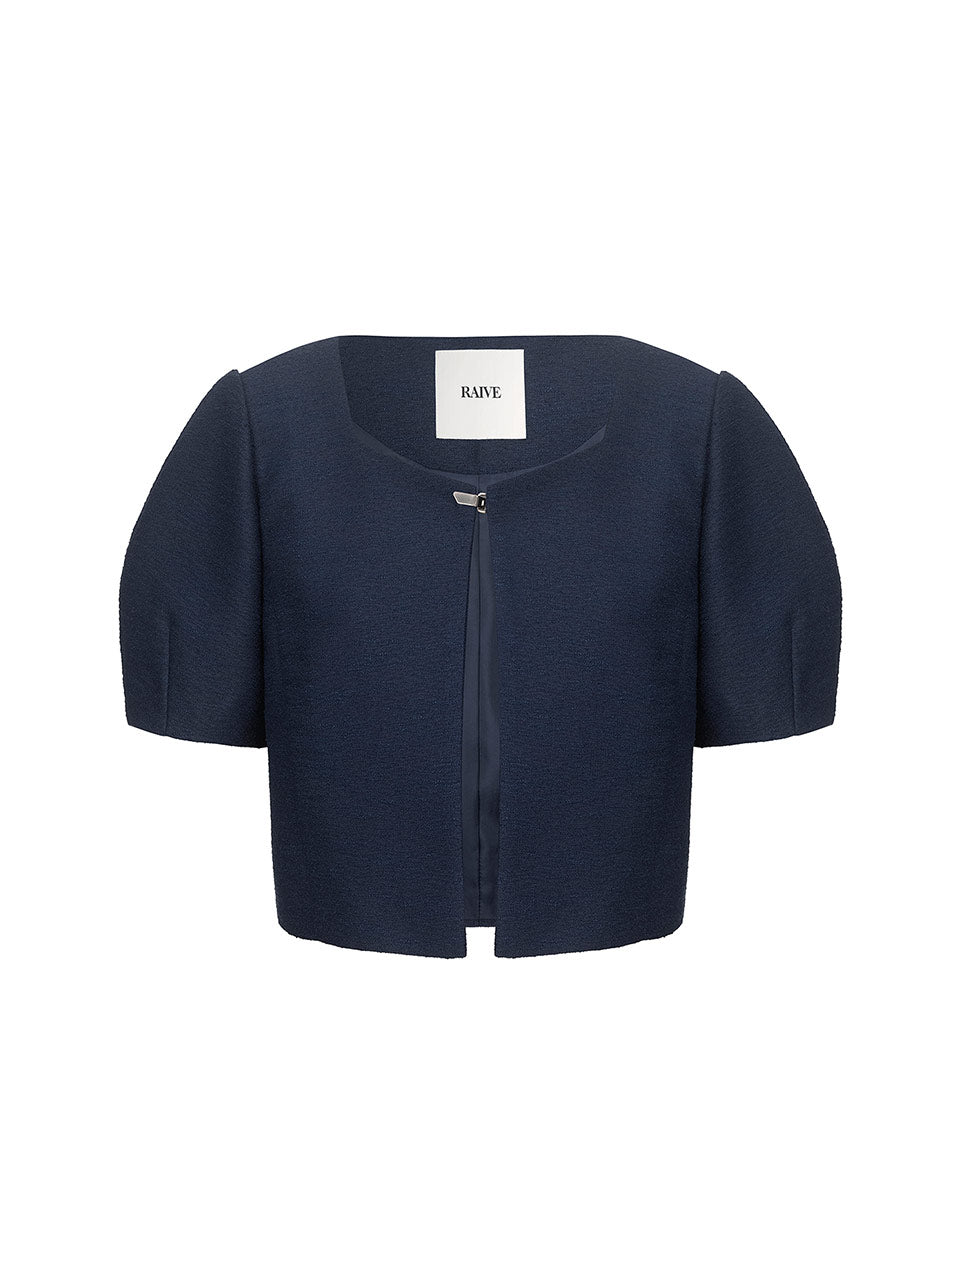 Square Neck Jacket in Navy